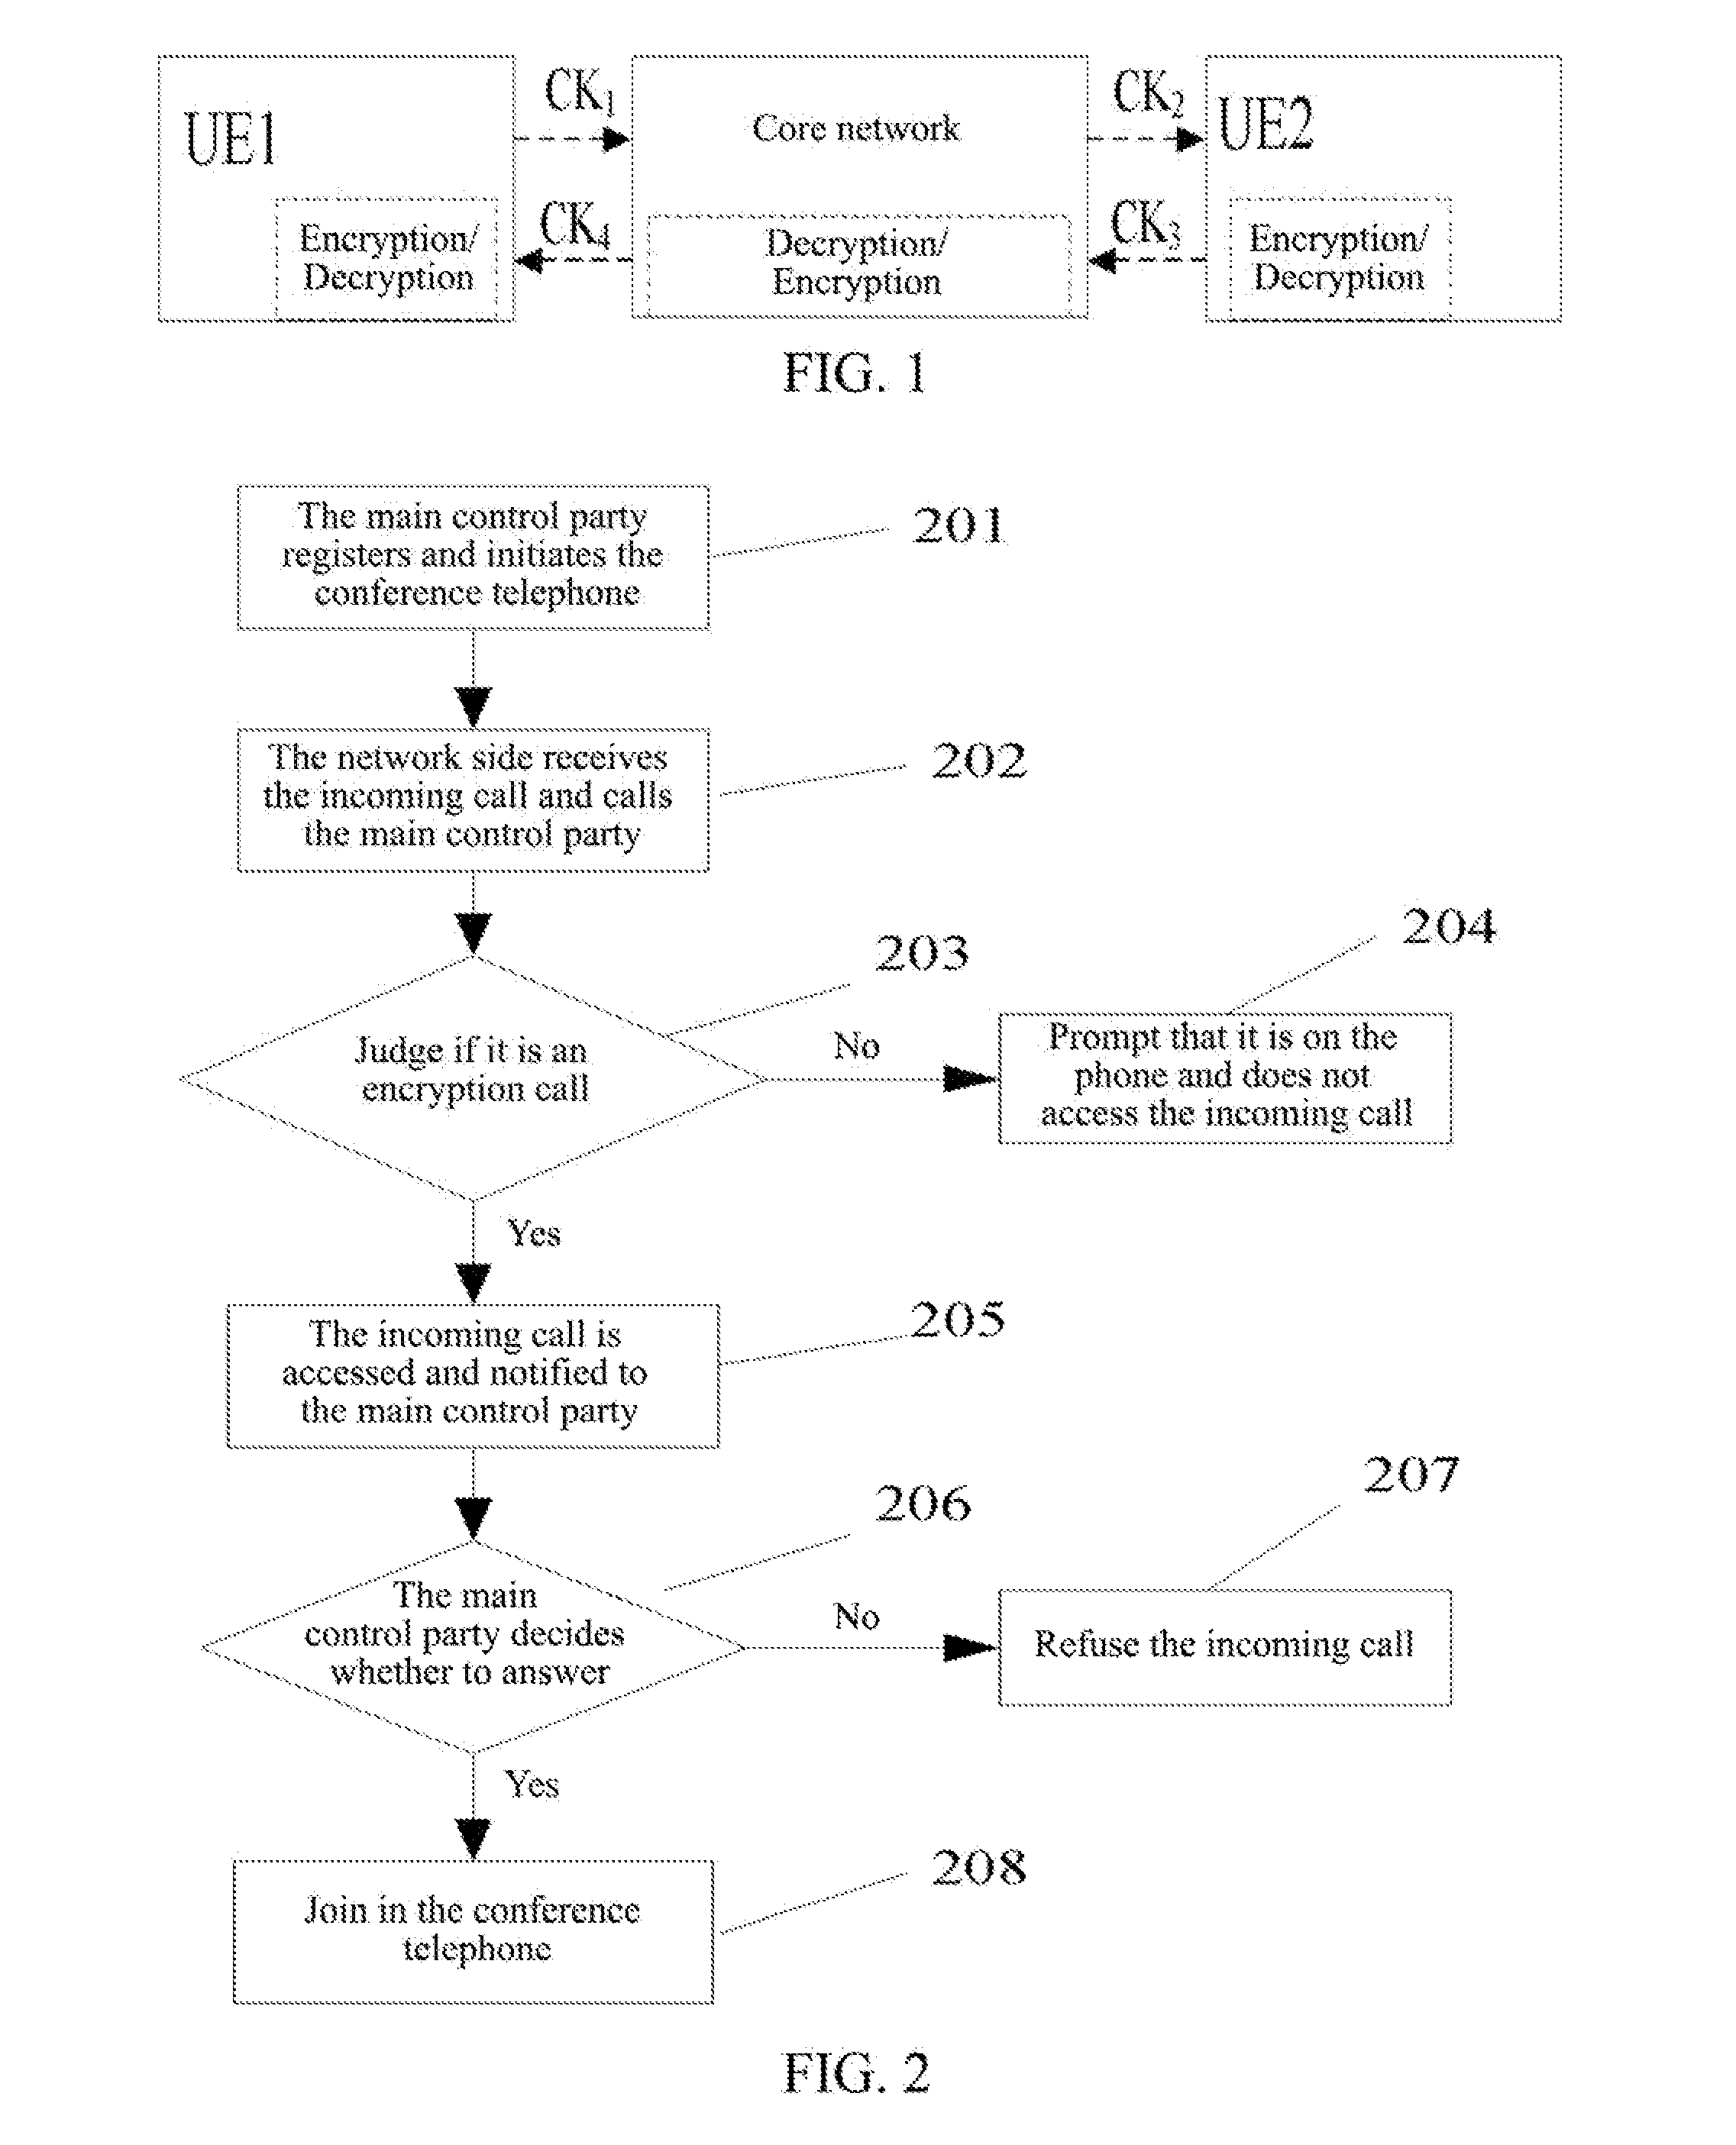 Method and System for Pre-Accessing Conference Telephone and Network Side Device